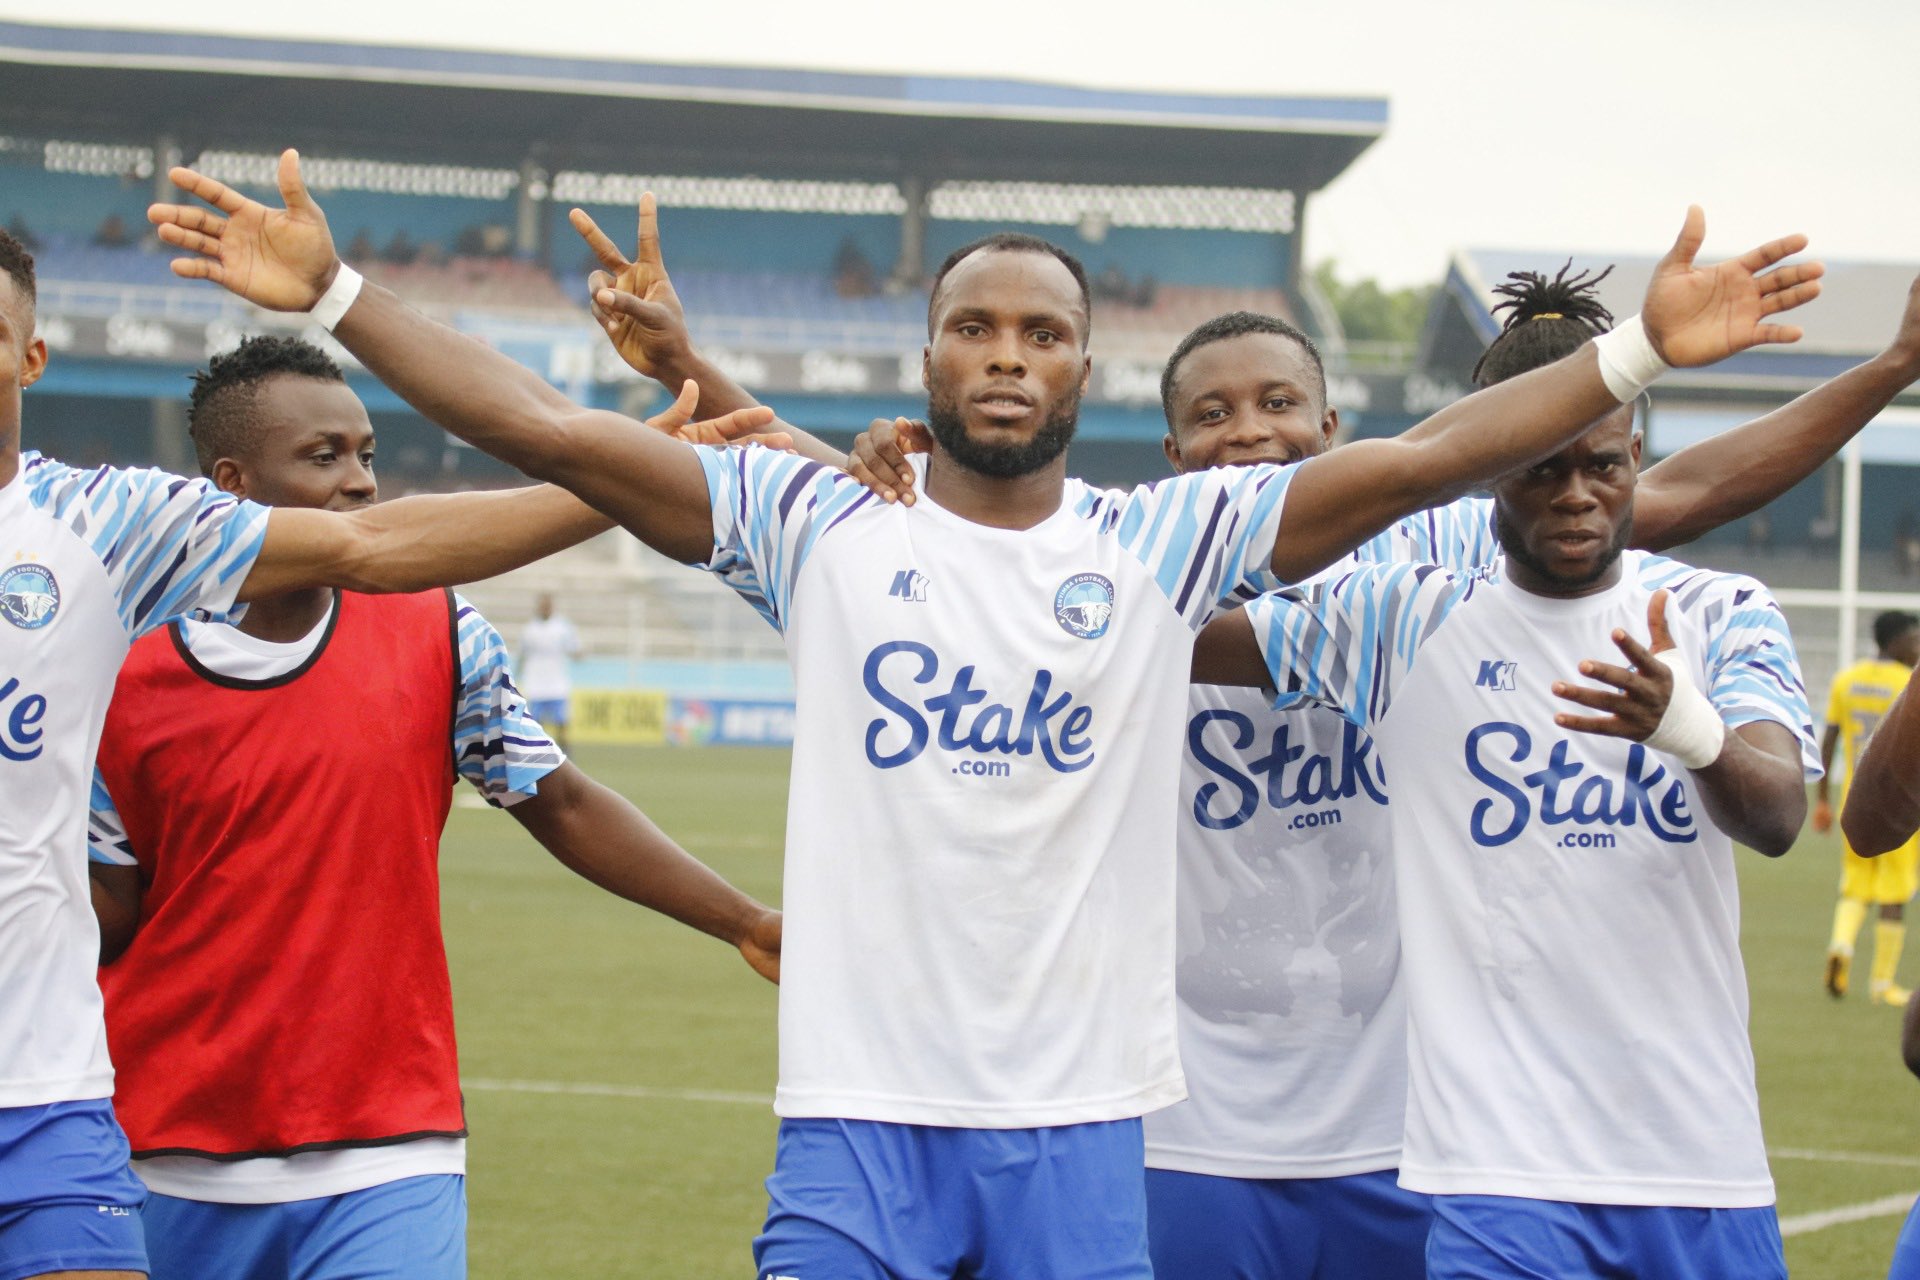 NPFL: Enyimba go top with big win over Gombe United